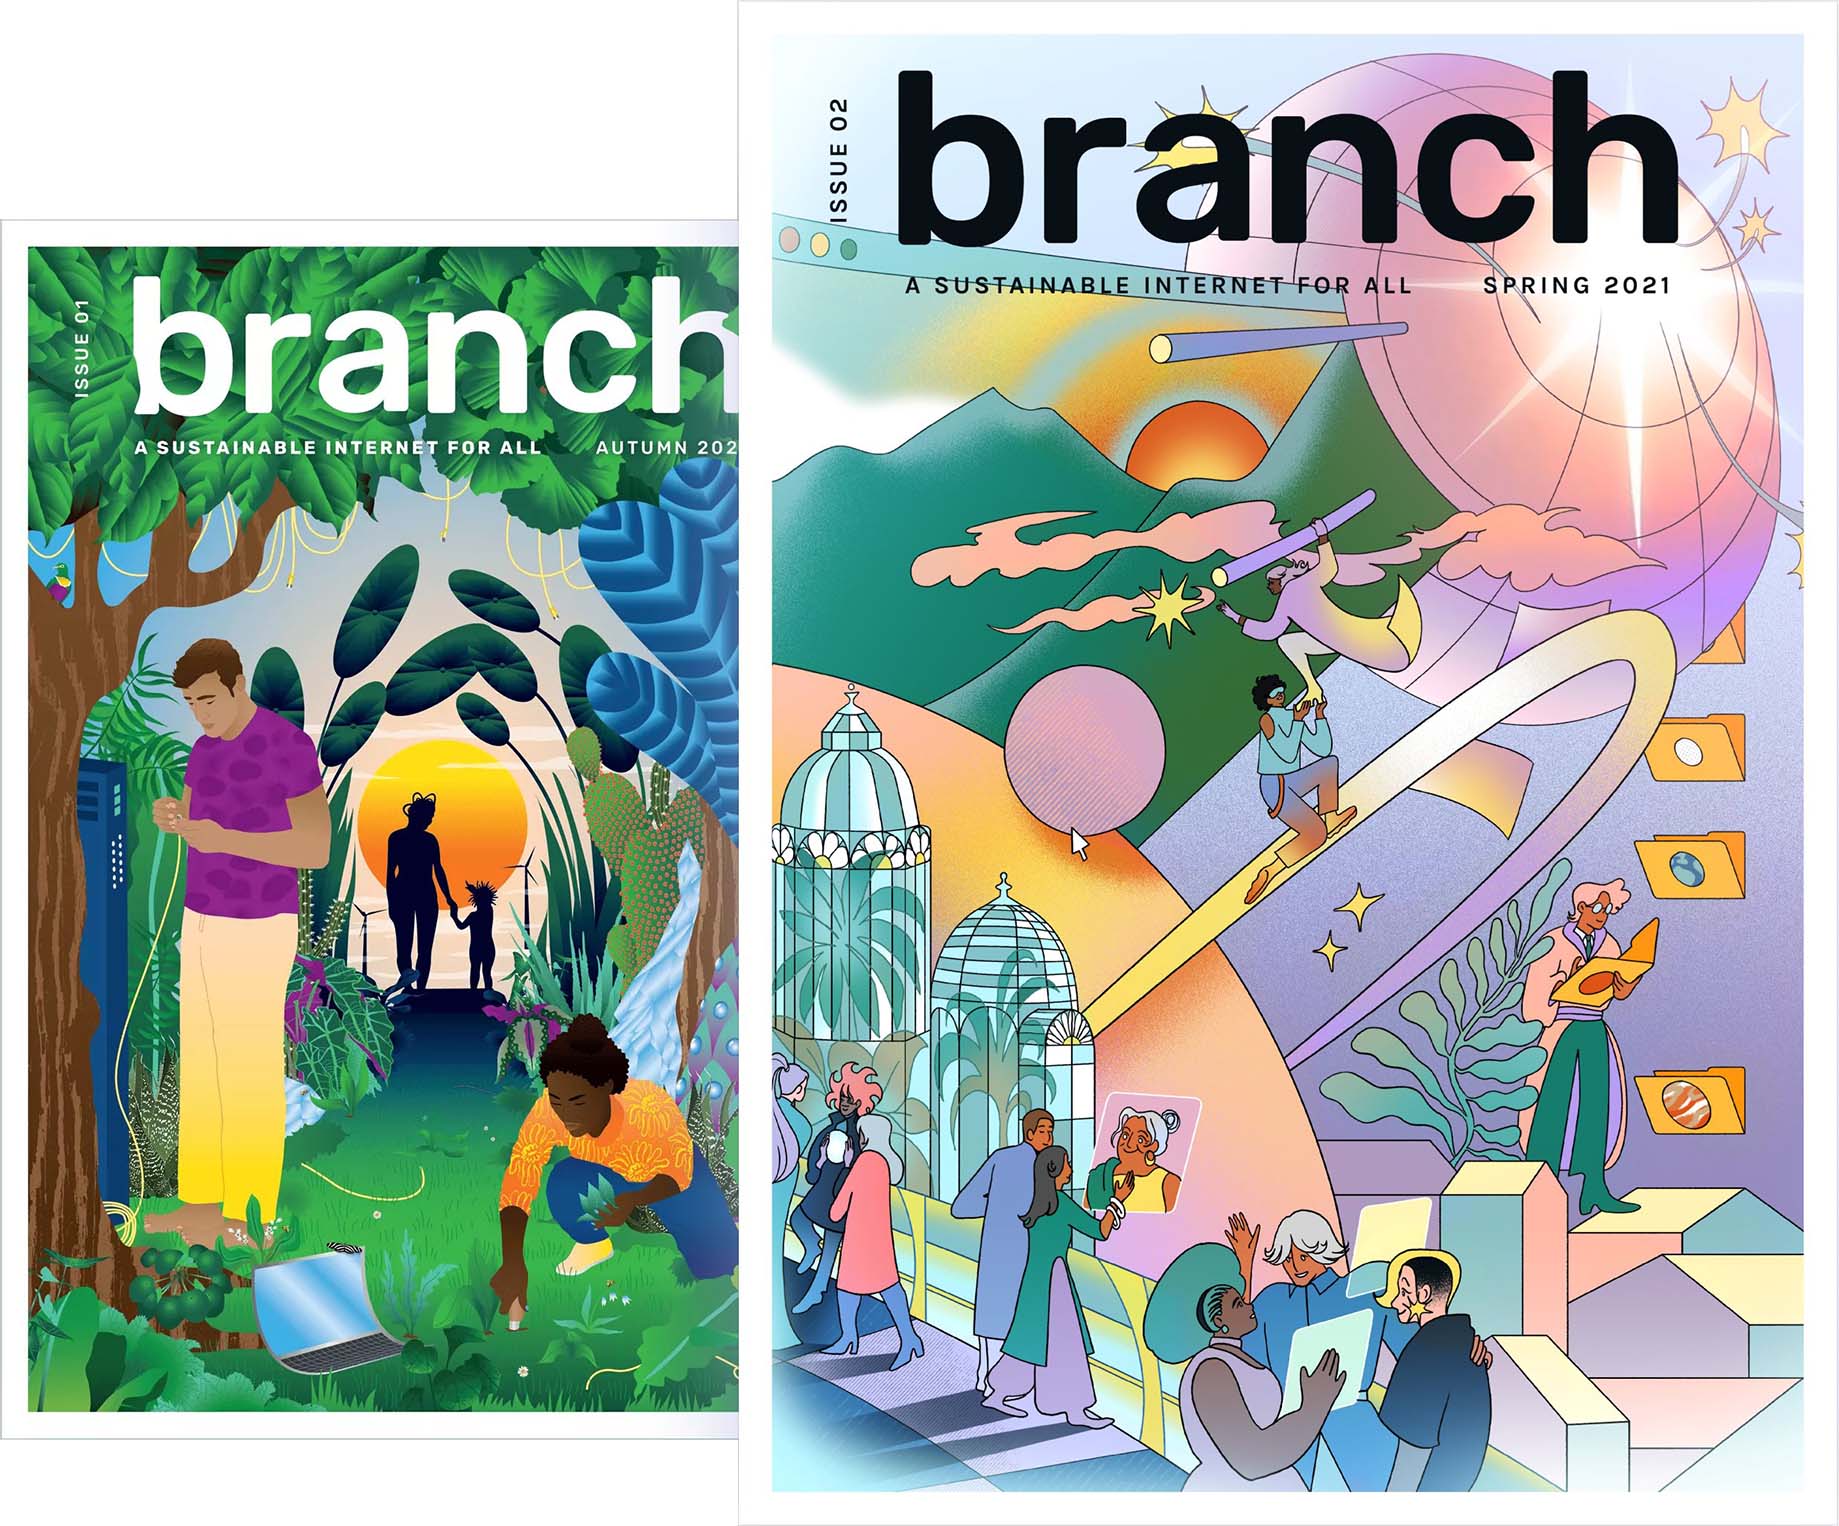 Two magazine covers, one with cartoon figures plugging devices into a forest, and the other with figures inhabiting a futuristic landscape